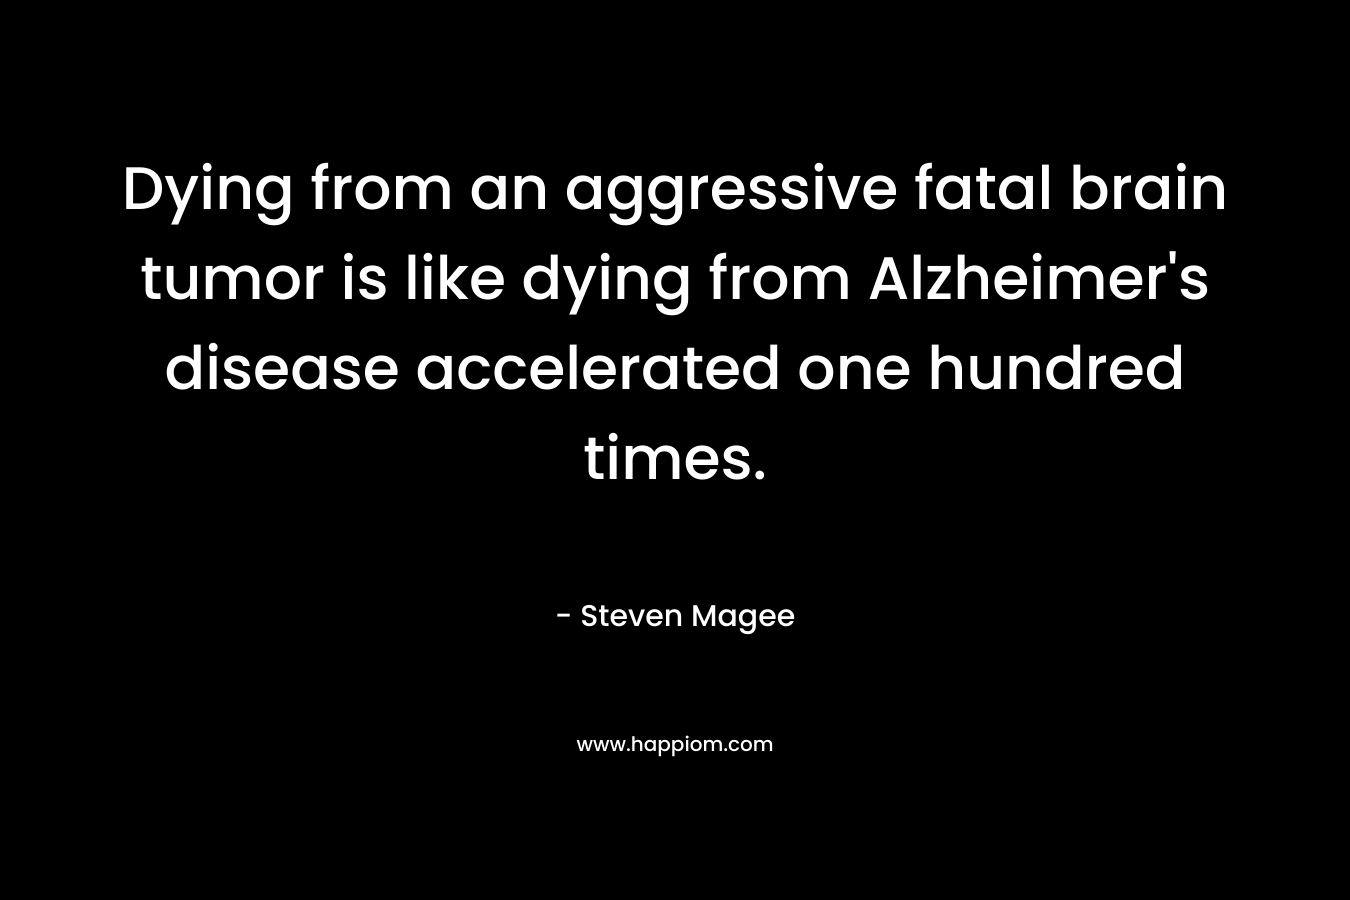 Dying from an aggressive fatal brain tumor is like dying from Alzheimer's disease accelerated one hundred times.